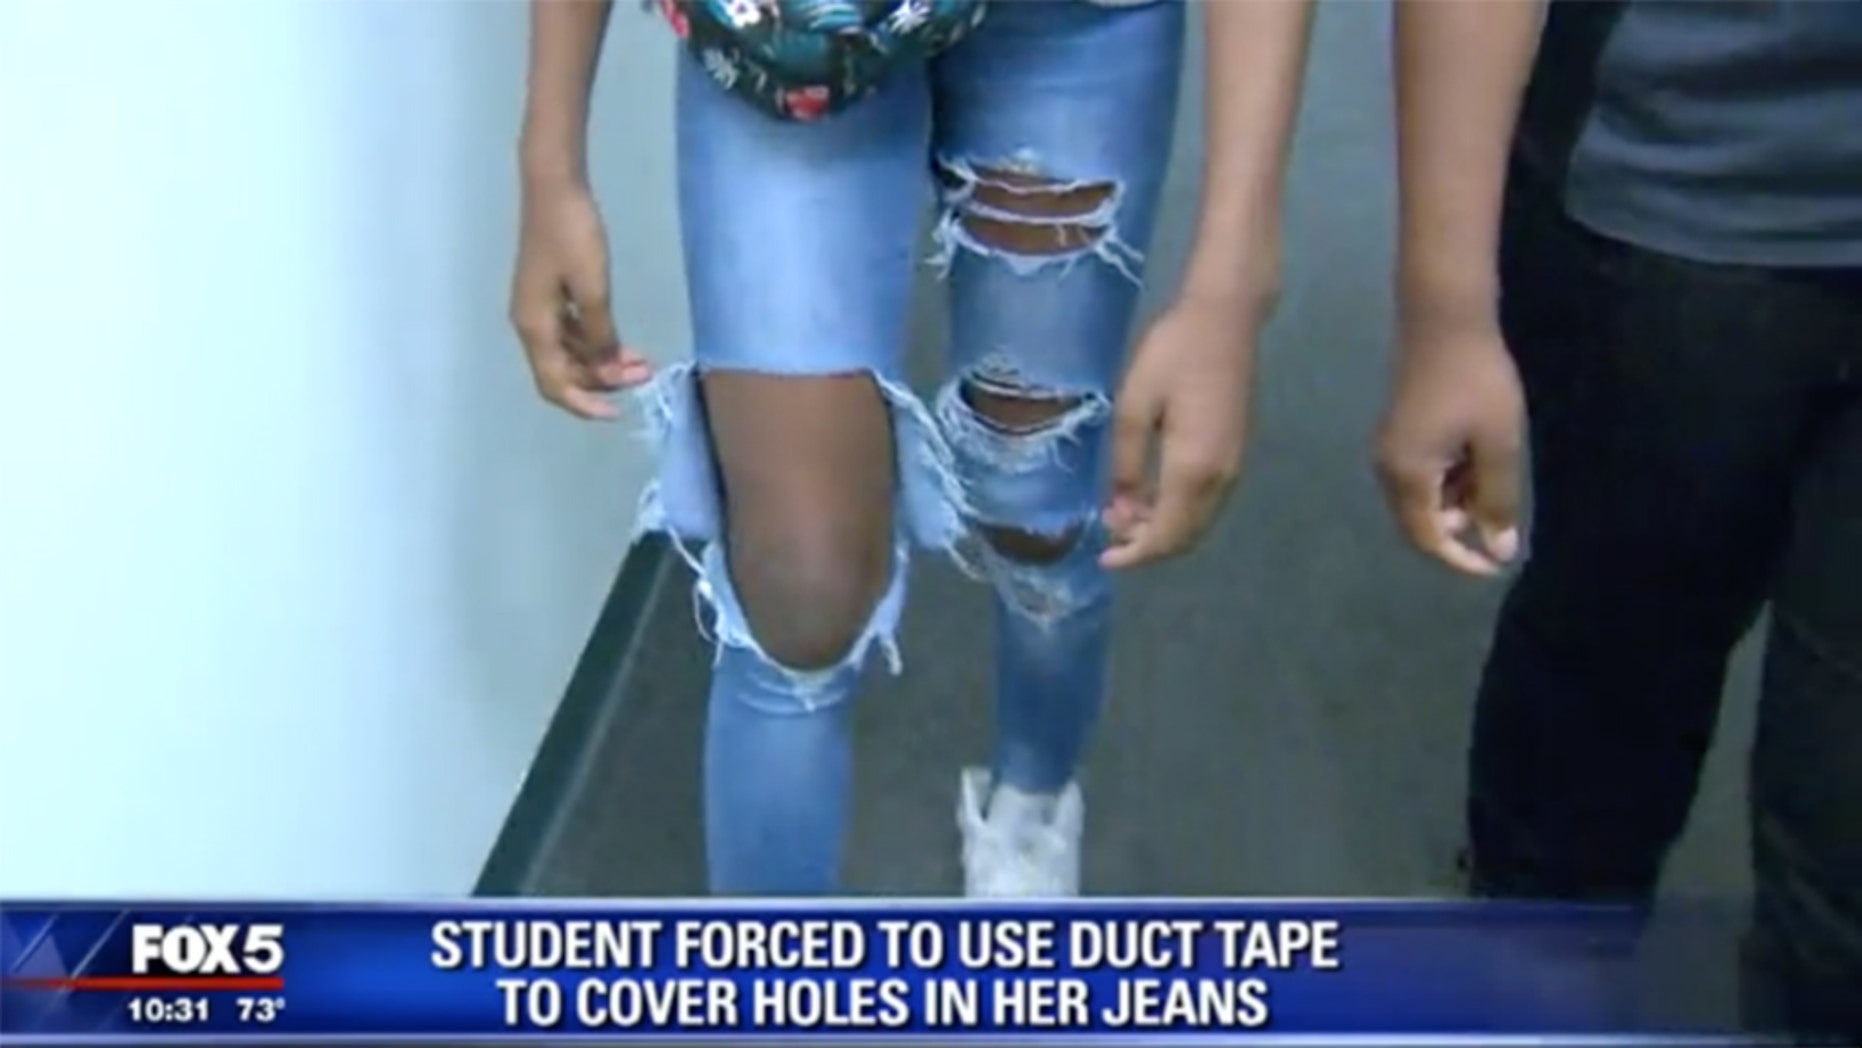 Mom Angry School Forced Daughter To Cover Legs With Duct Tape For